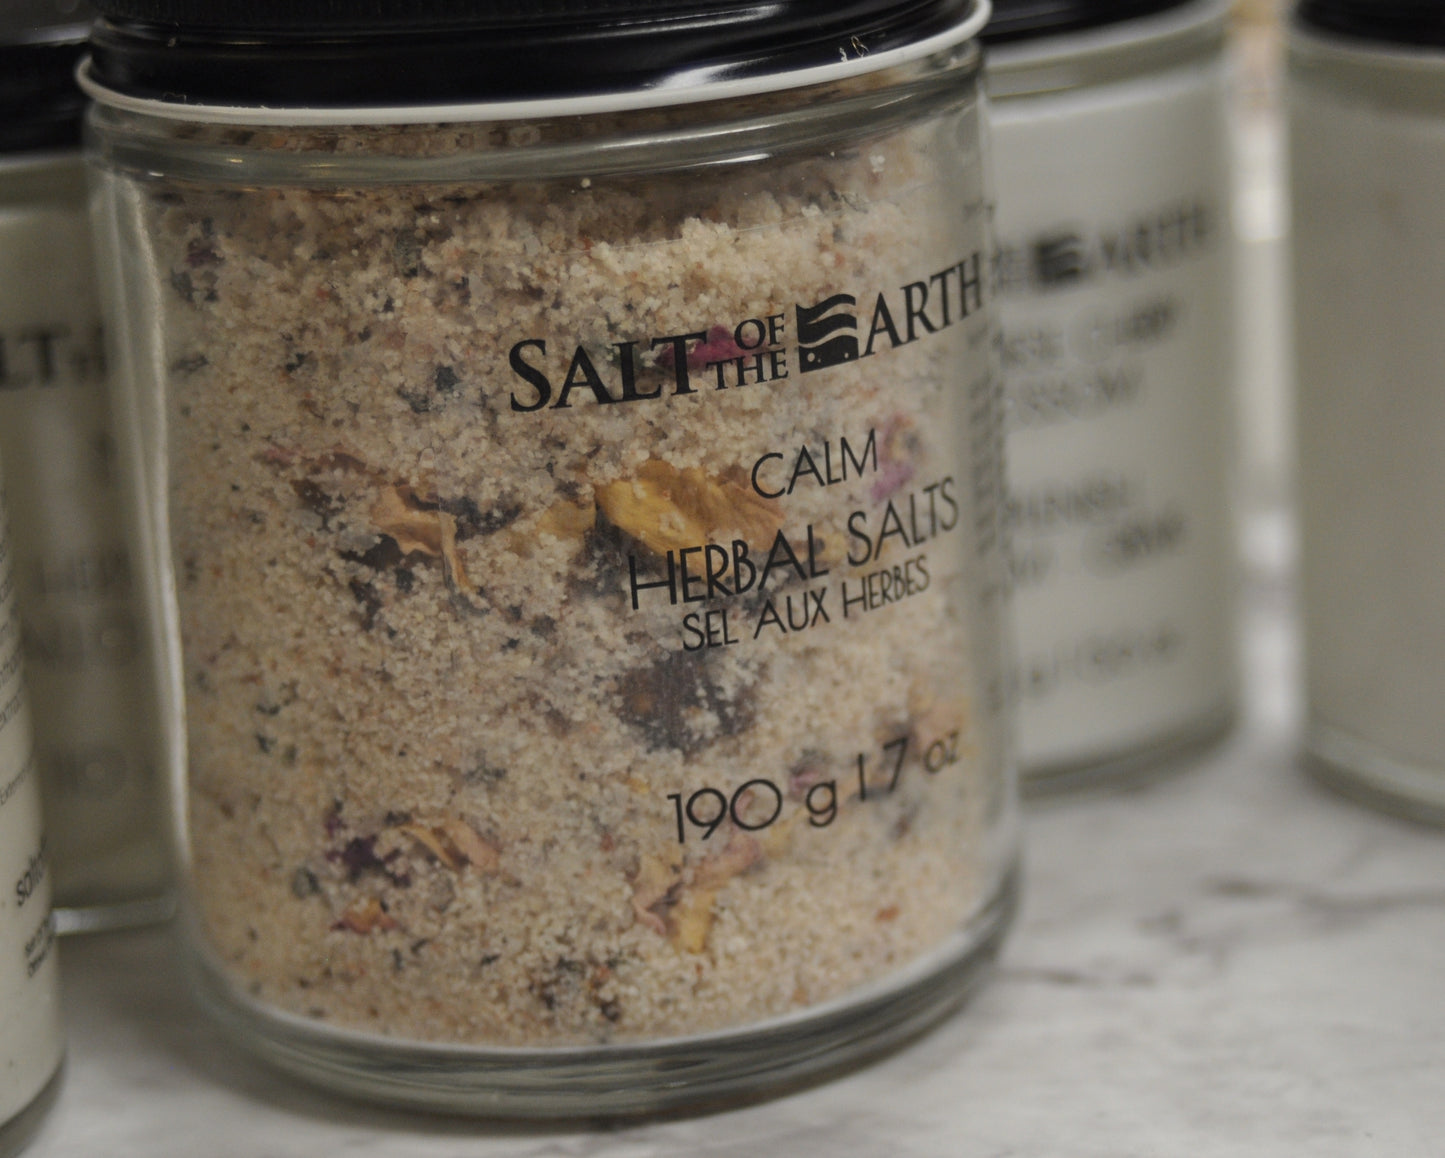 HERBAL BATH SALTS | HIBISCUS AND SAGE SKIN & MUSCLE CARE - SALT OF THE EARTH